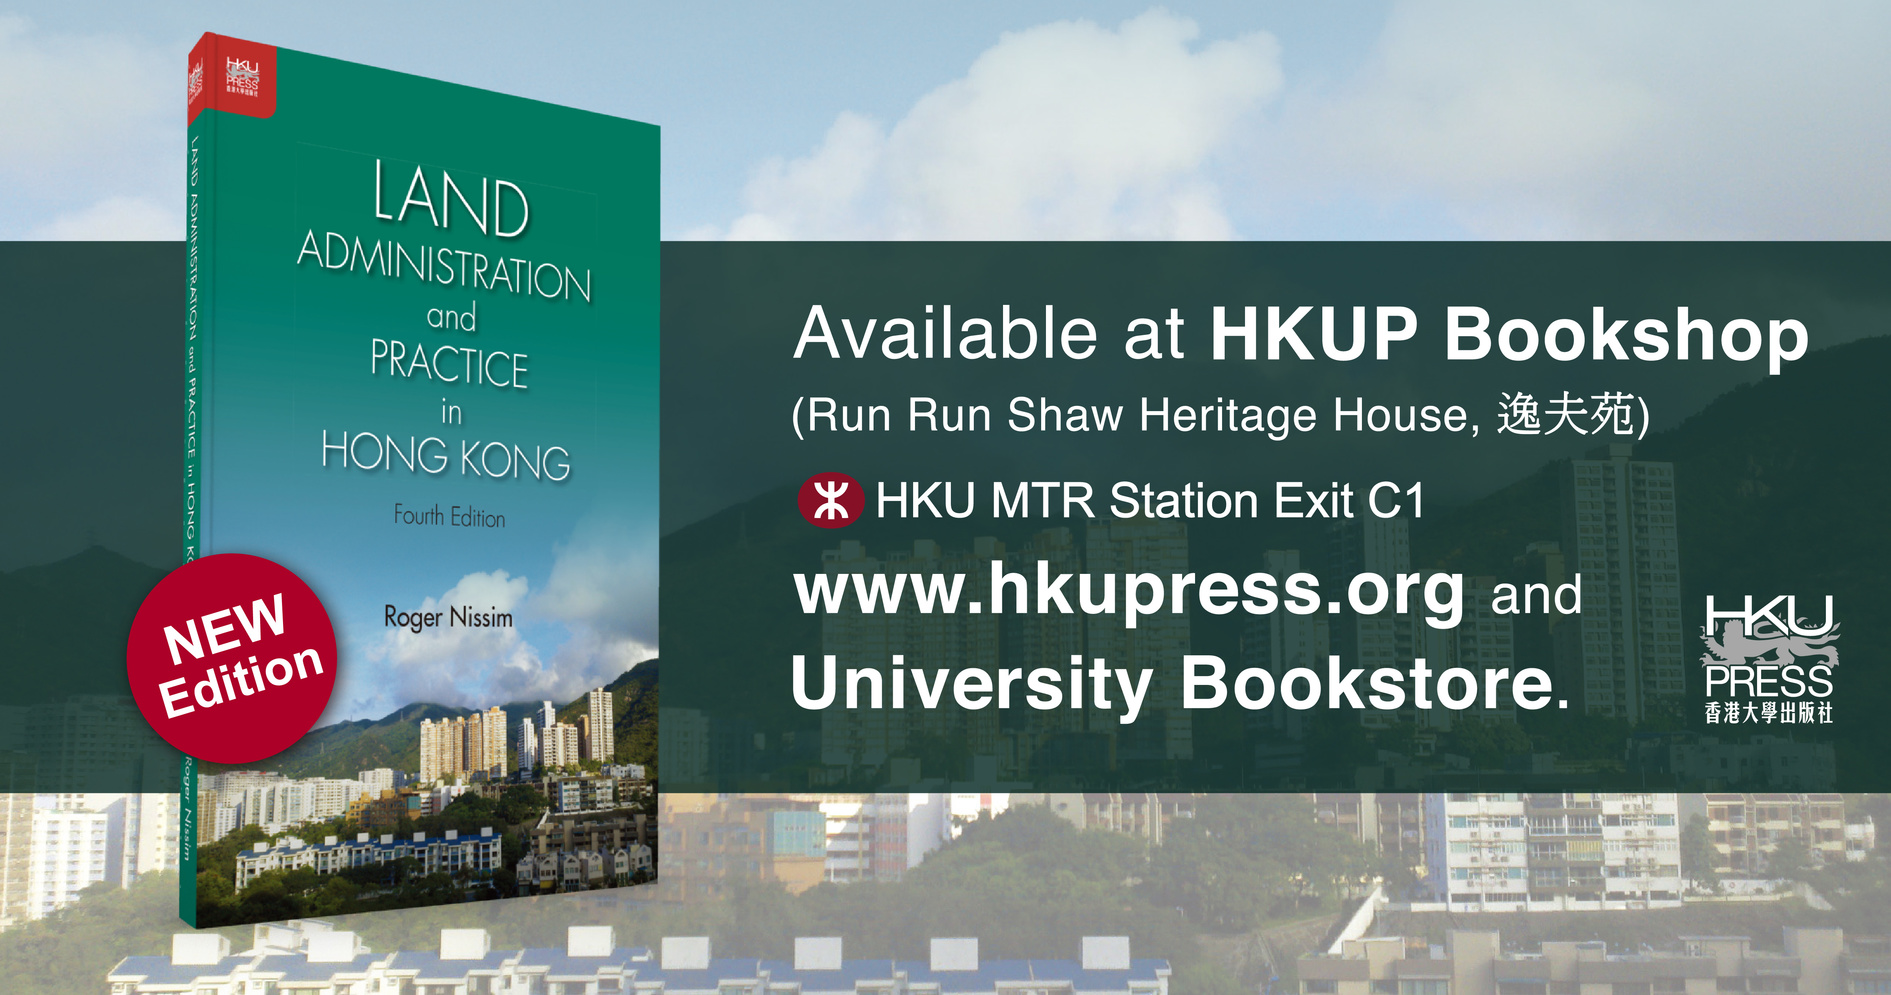 HKU Press - New Edition: Land Administration and Practice in Hong Kong, Fourth Edition